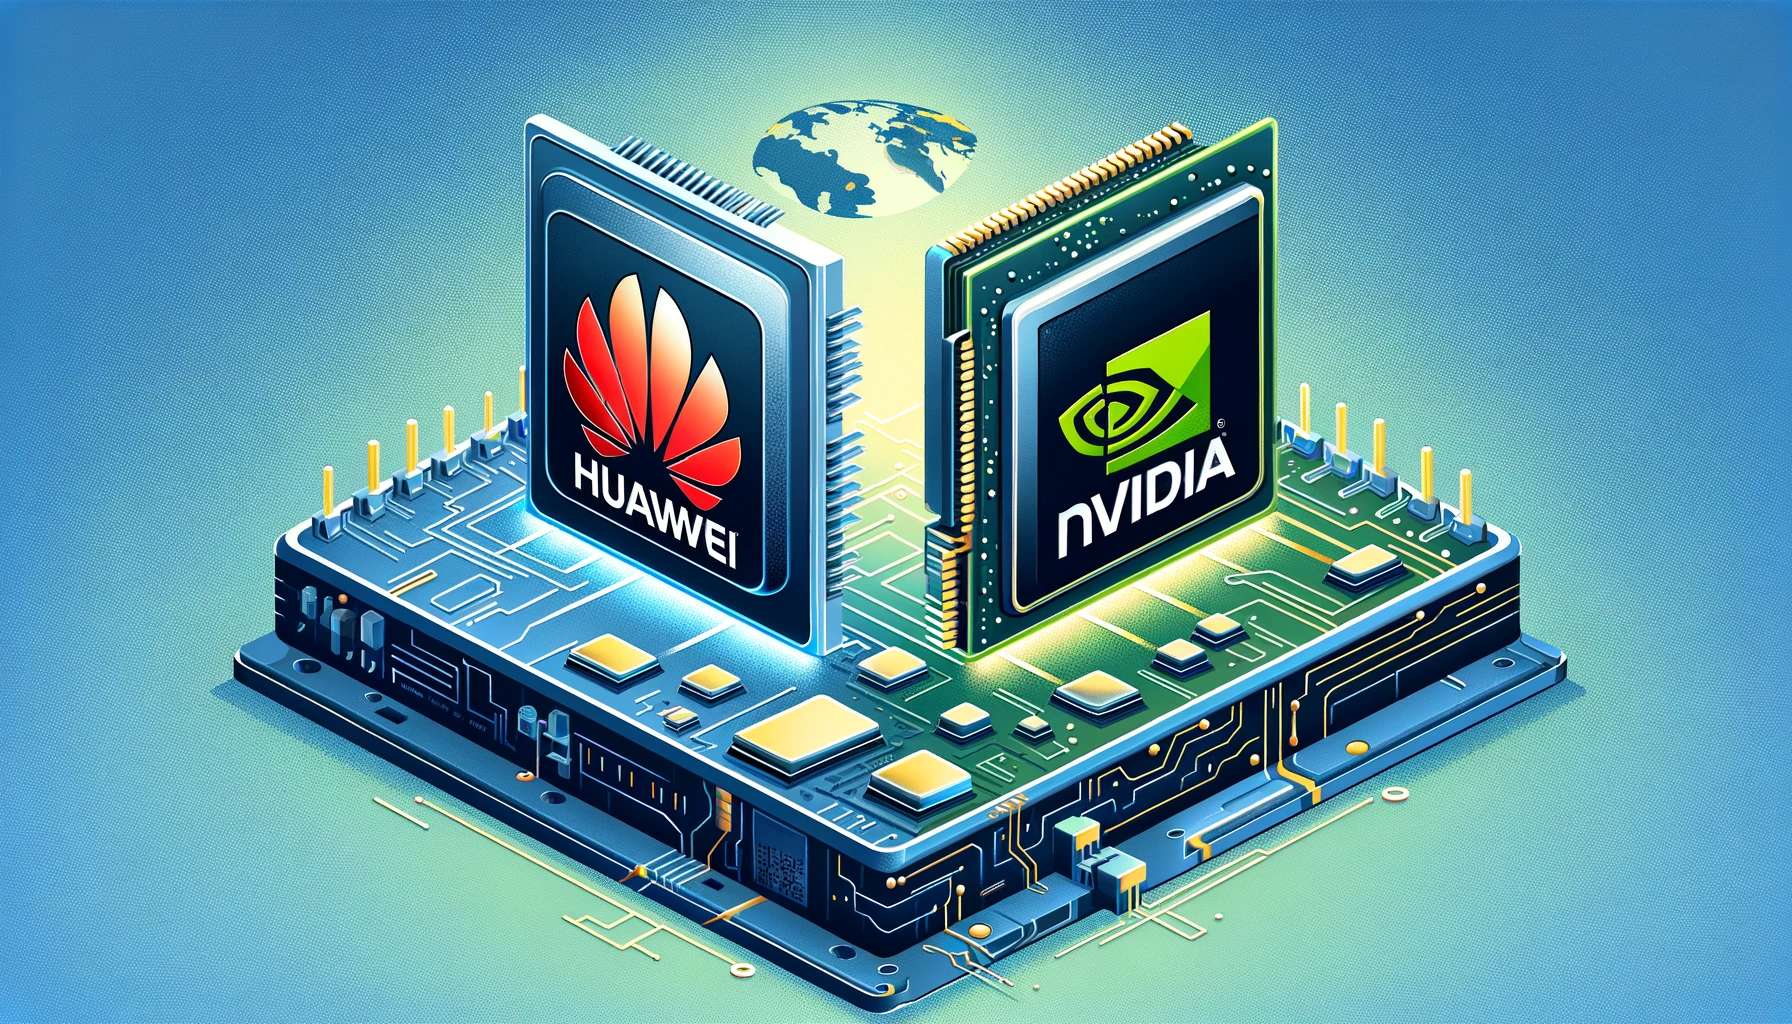 Huawei’s daring venture into the AI chip market poses a challenge to Nvidia in the face of US export constraints.